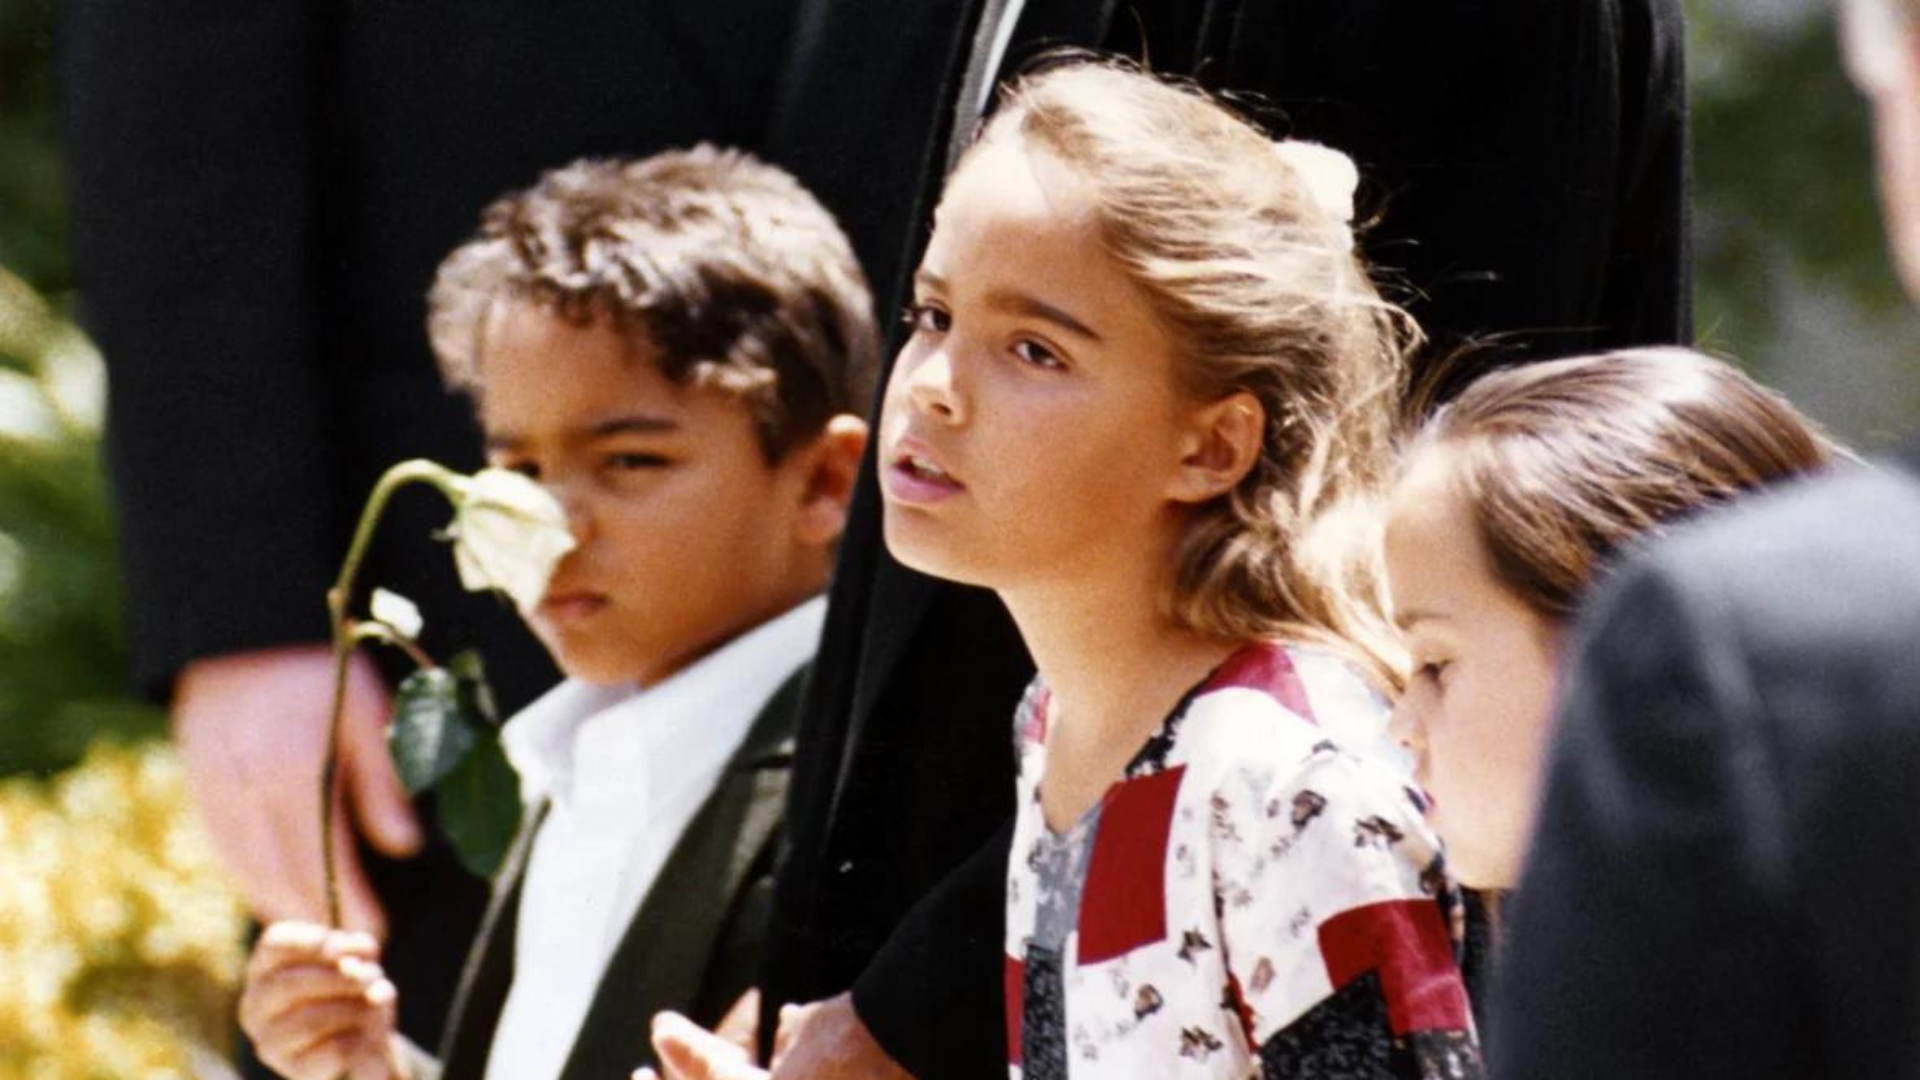 Sydney Simpson along with her father and brother during her mother's funeral